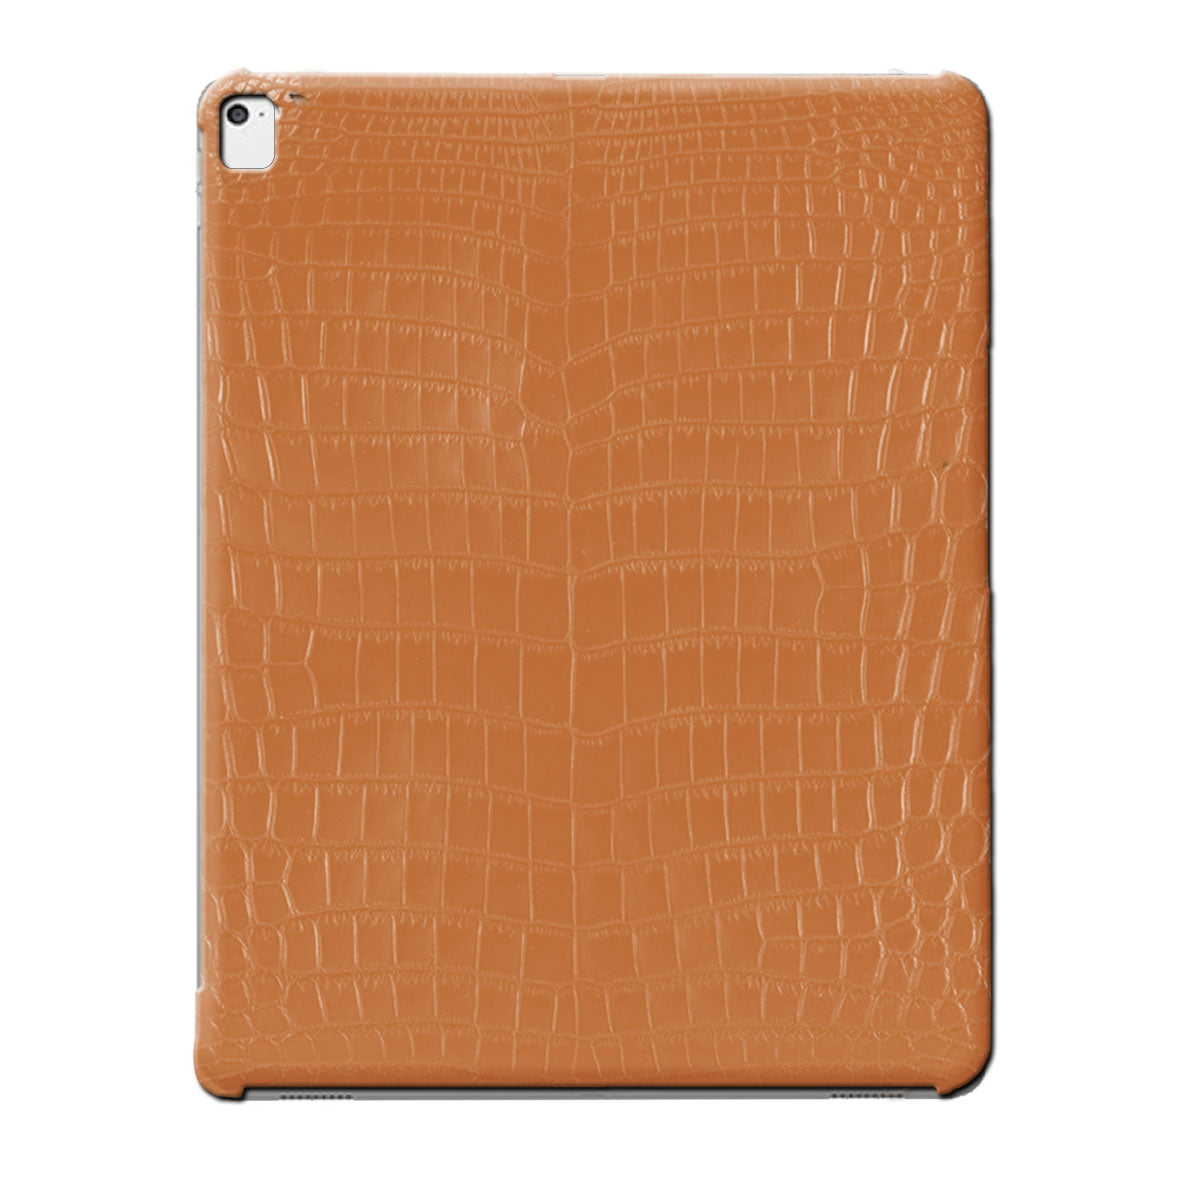 Leather iPad case / cover - iPad Pro 12.9 inches ( 1st to 5th 